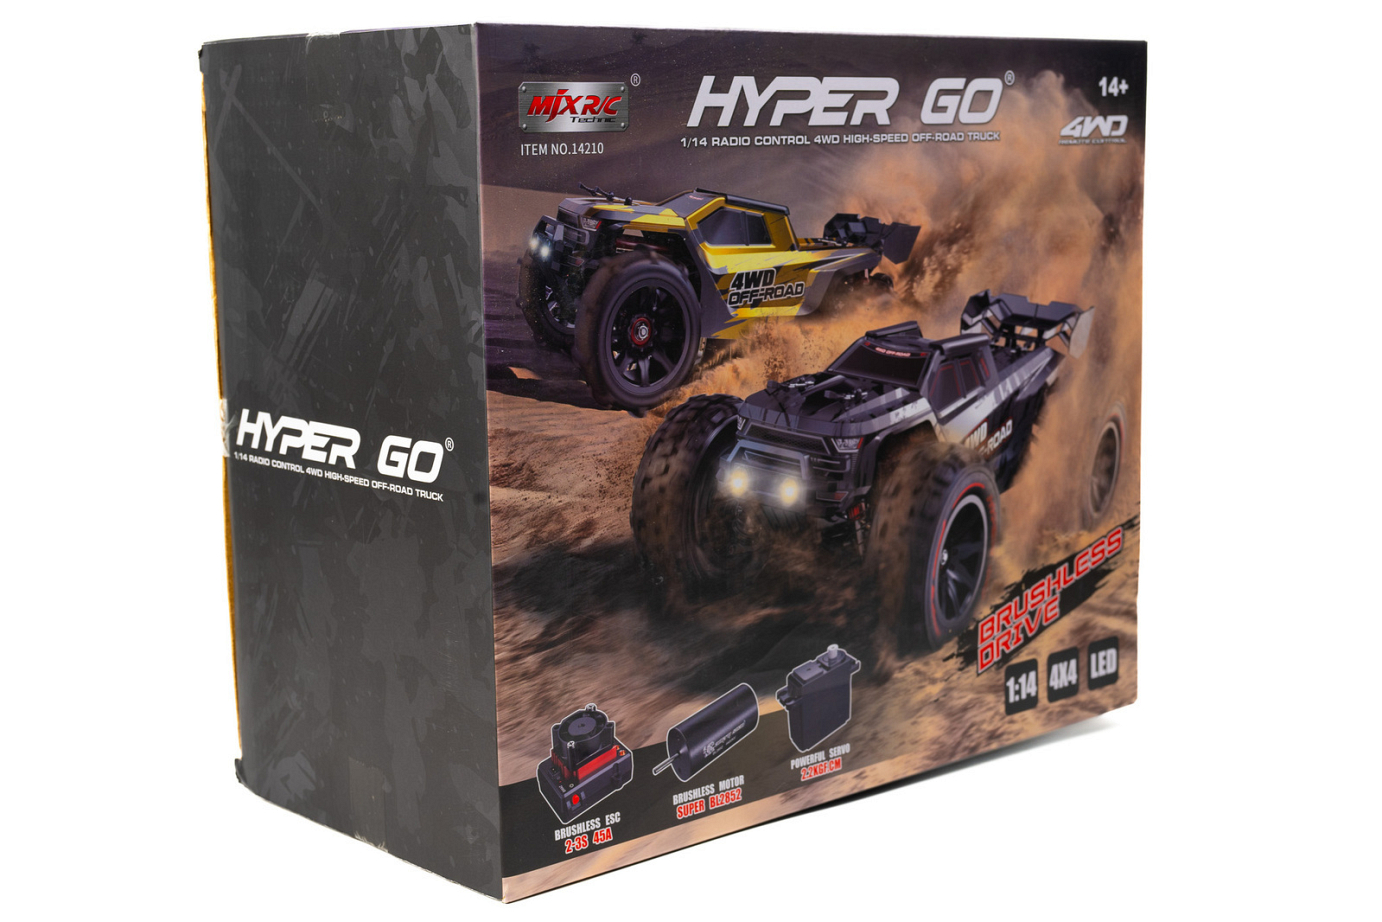 MJX HYPER GO 14210 BRUSHLESS RC TRUCK REVIEW: MY FAVOURITE OFFROAD